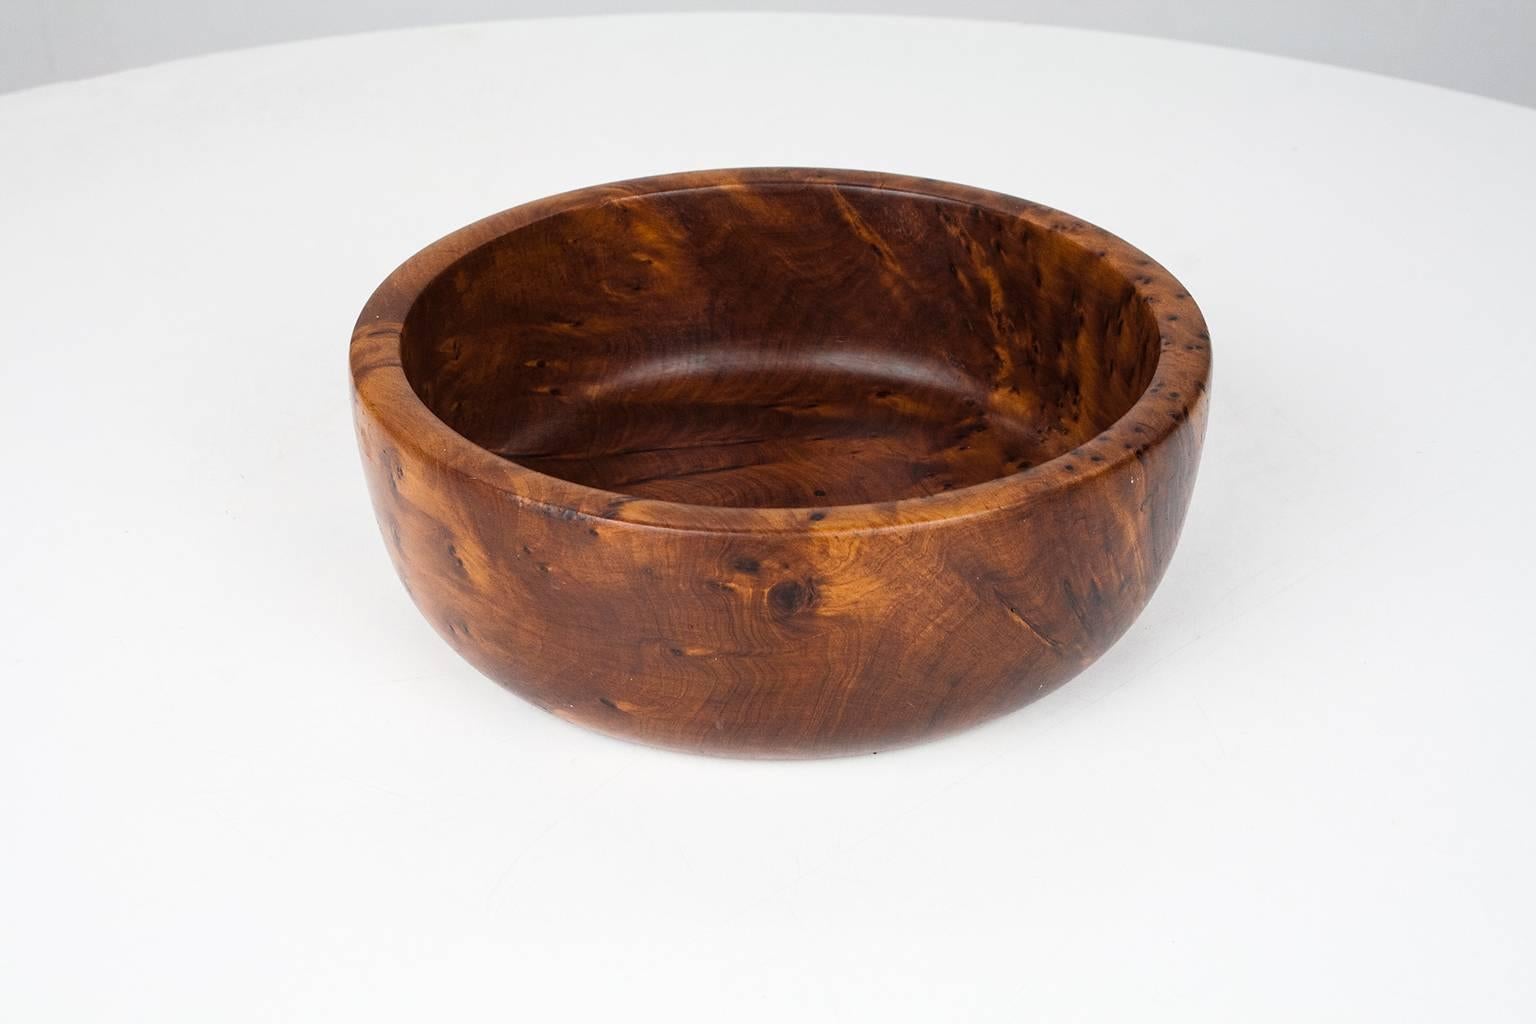 Vintage hand-turned solid wooden, elm burl bowl (measure: width 18cm/ 7.09 inch) with charming grain and coloring. Decorative home accessory from the 1950s, Netherlands.